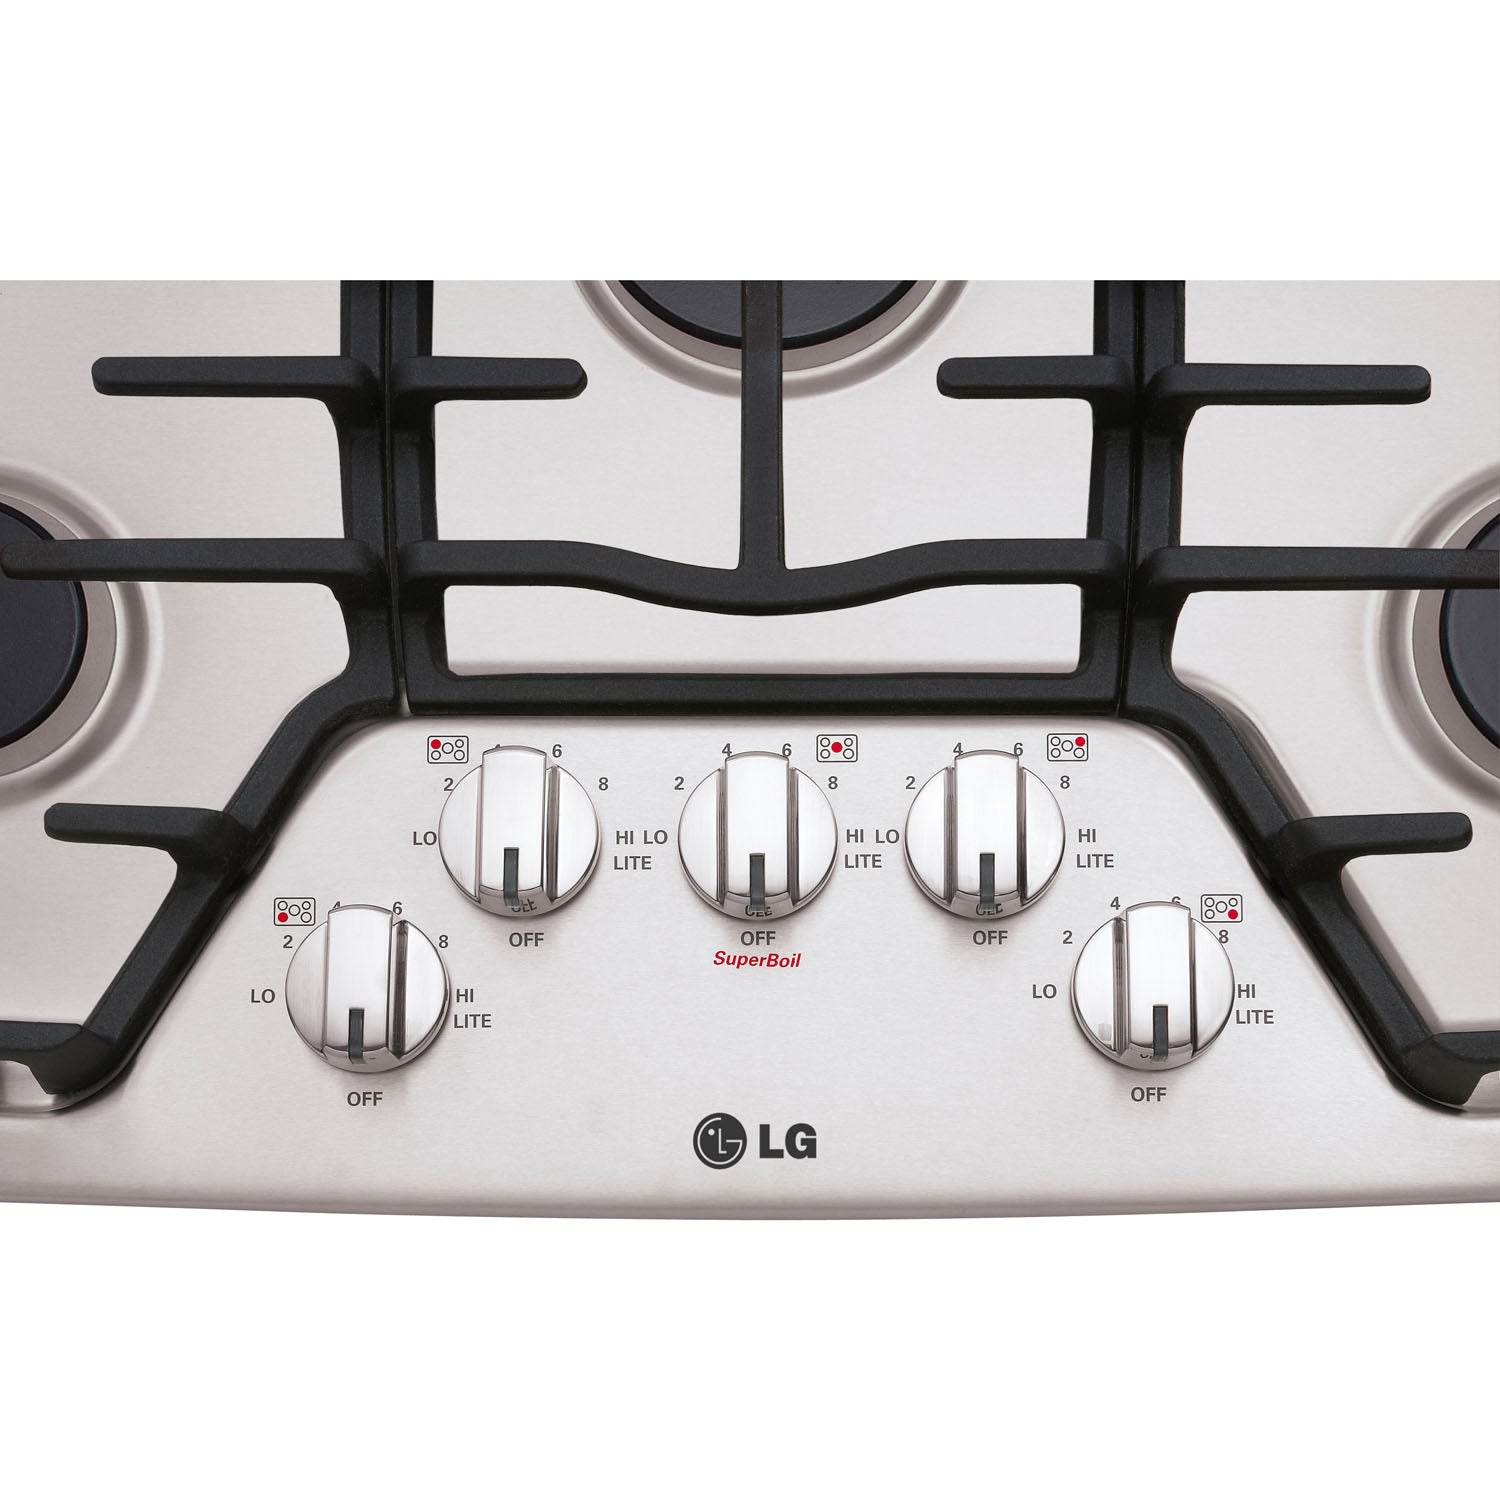 LG 30-In. Gas Cooktop with 17K BTU Center Burner (LCG3011ST)